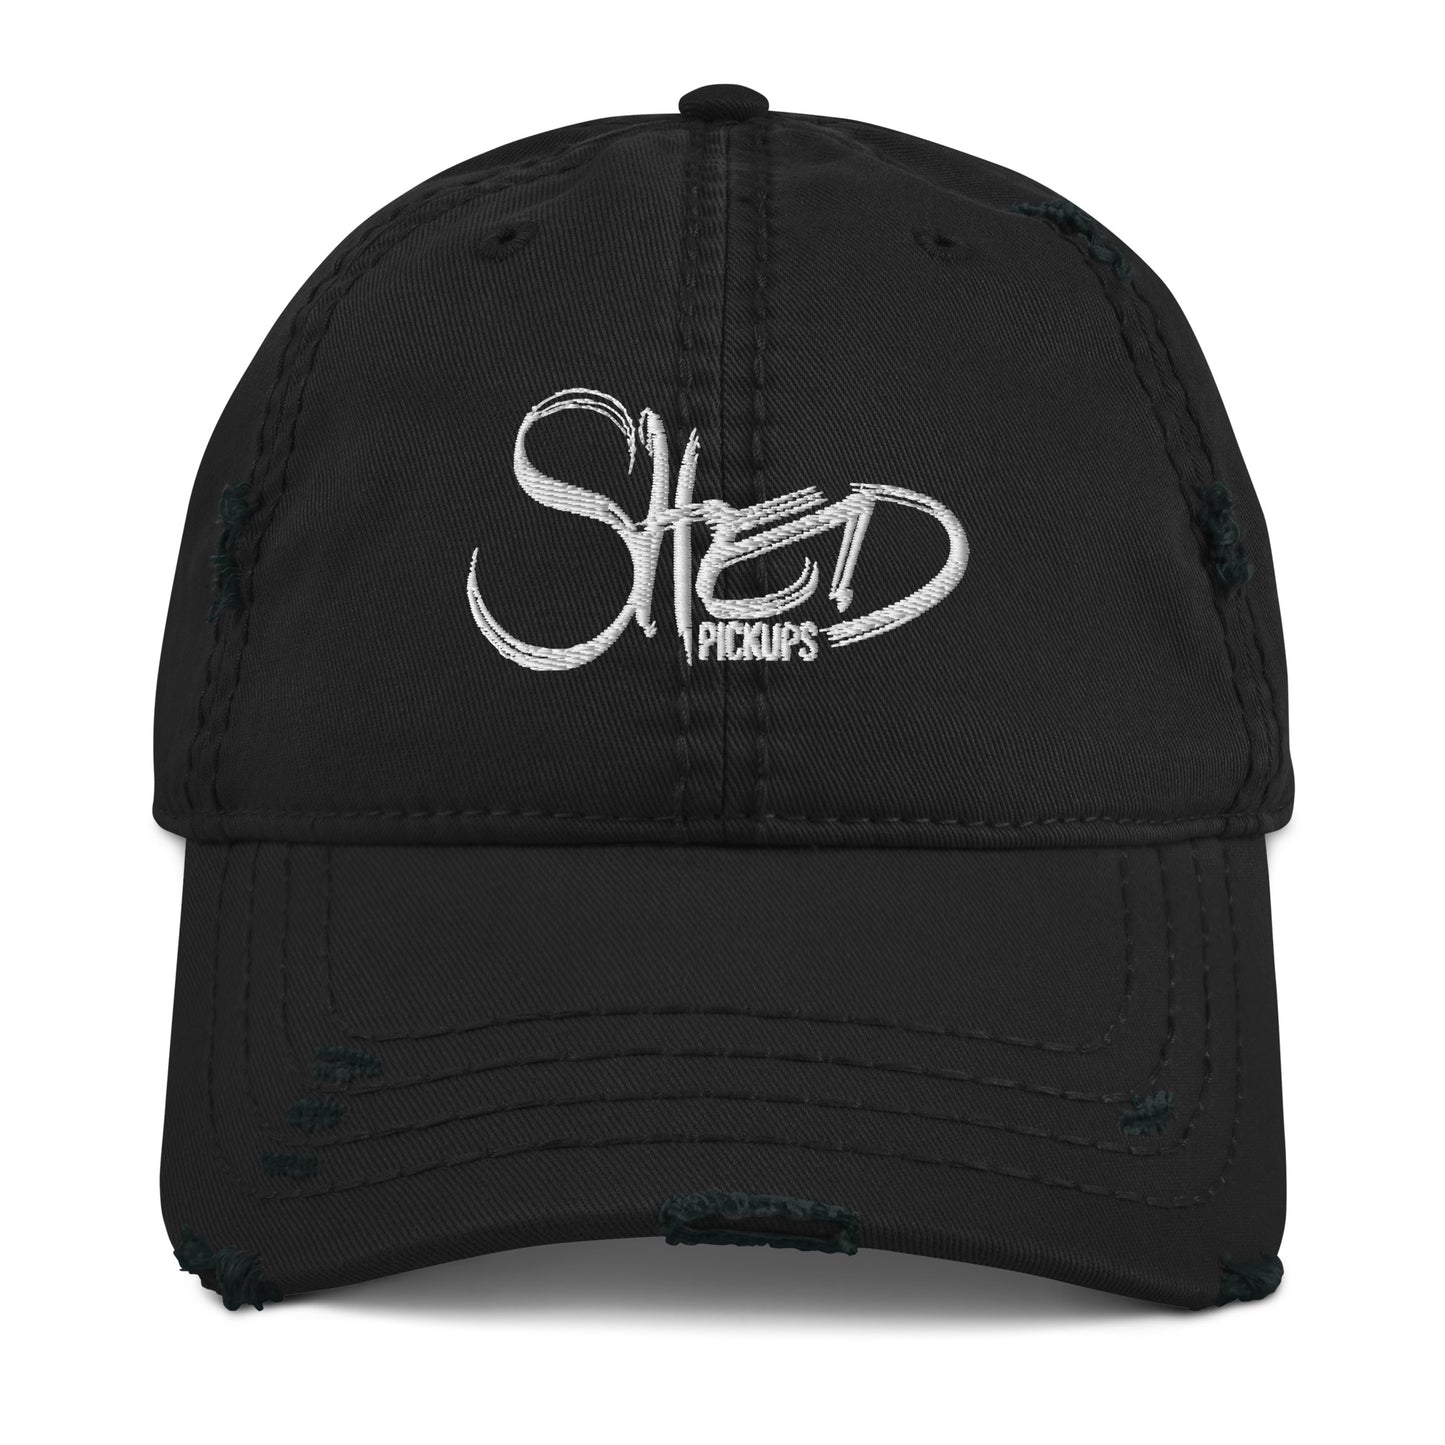 Shed Pickups Logo Distressed Style Trucker Cap